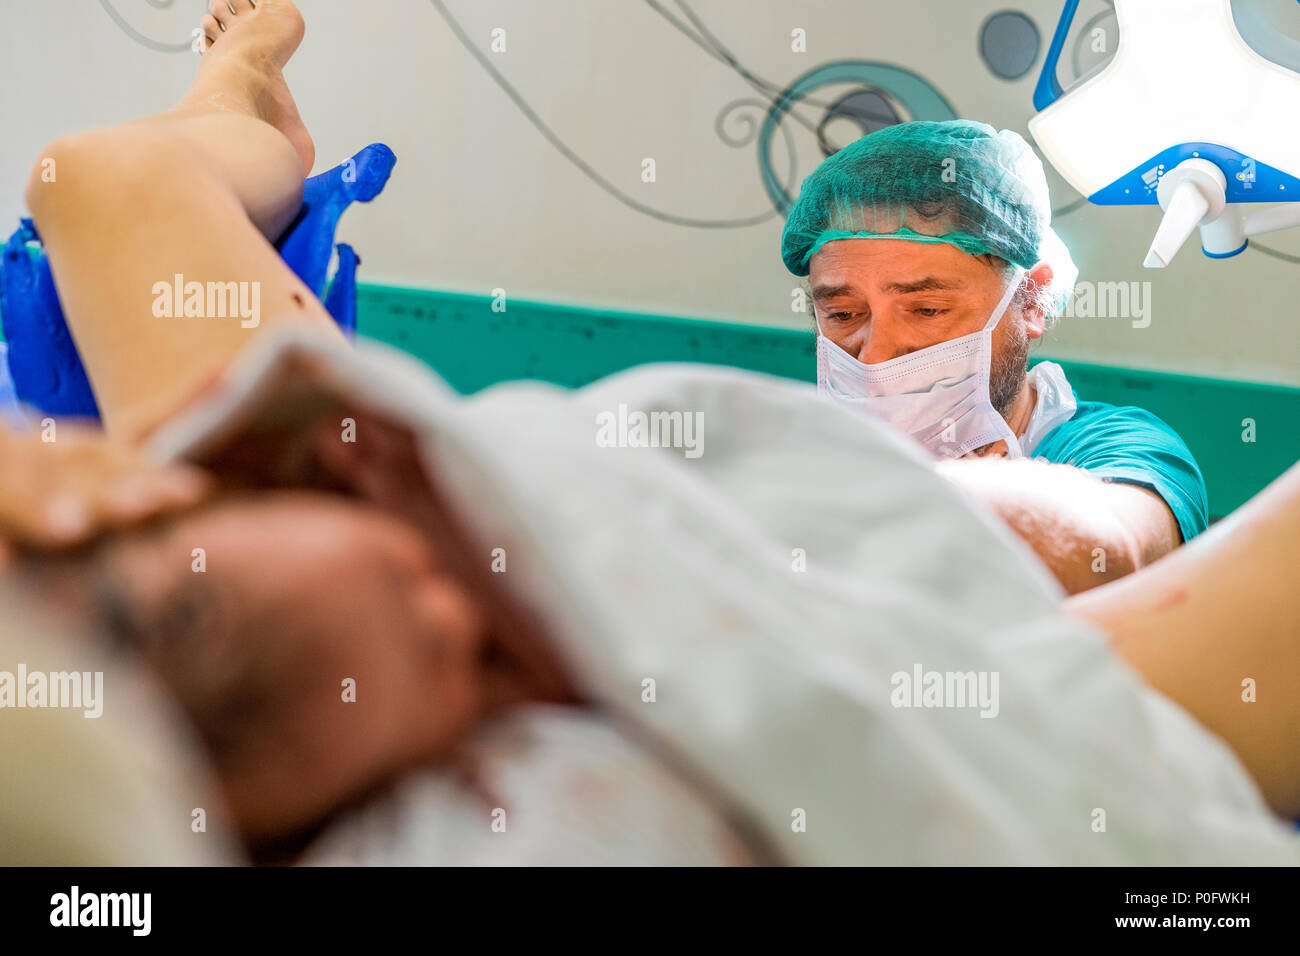 Faro, Portugal - May 7, 2018: The doctor and cute newborn baby boy just after childbirth in the foreground Stock Photo